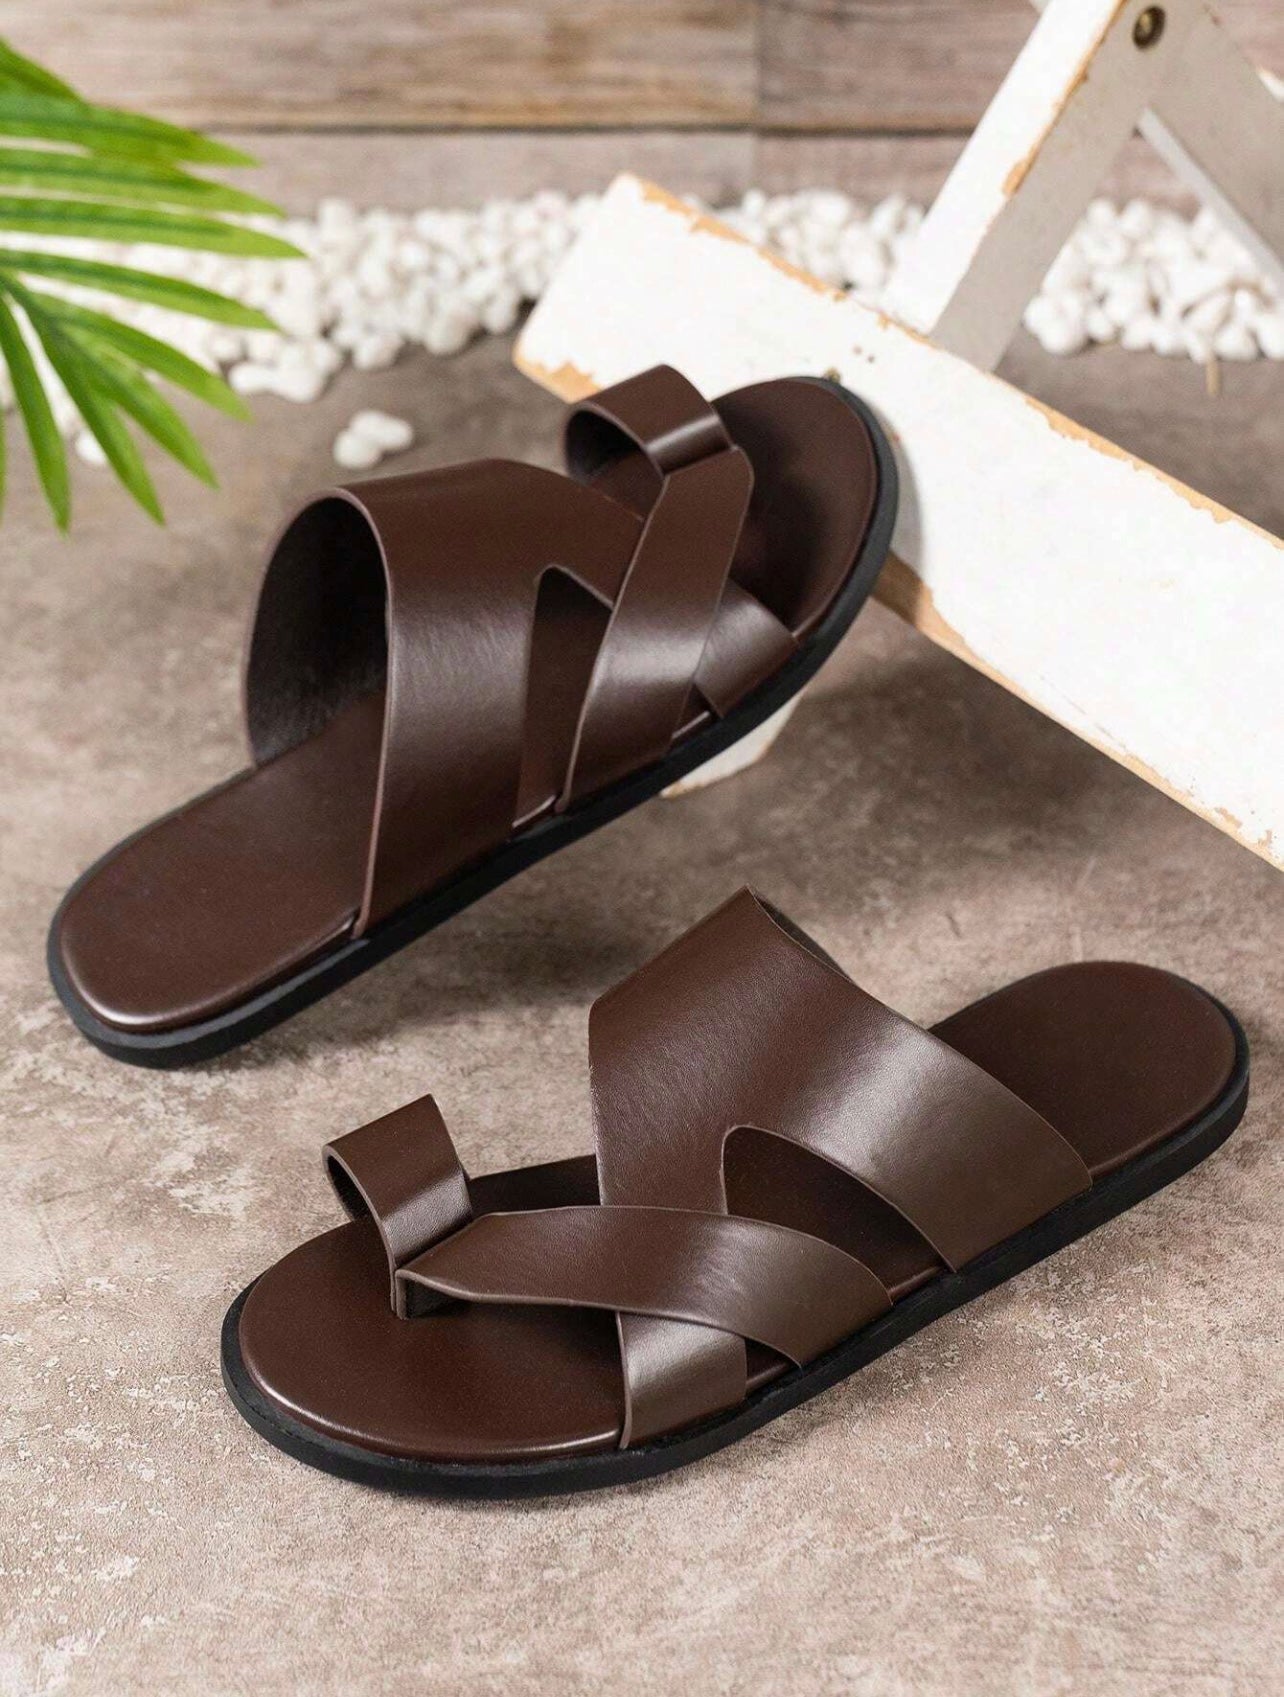 Men’s Open toe leather Slippers - Brown